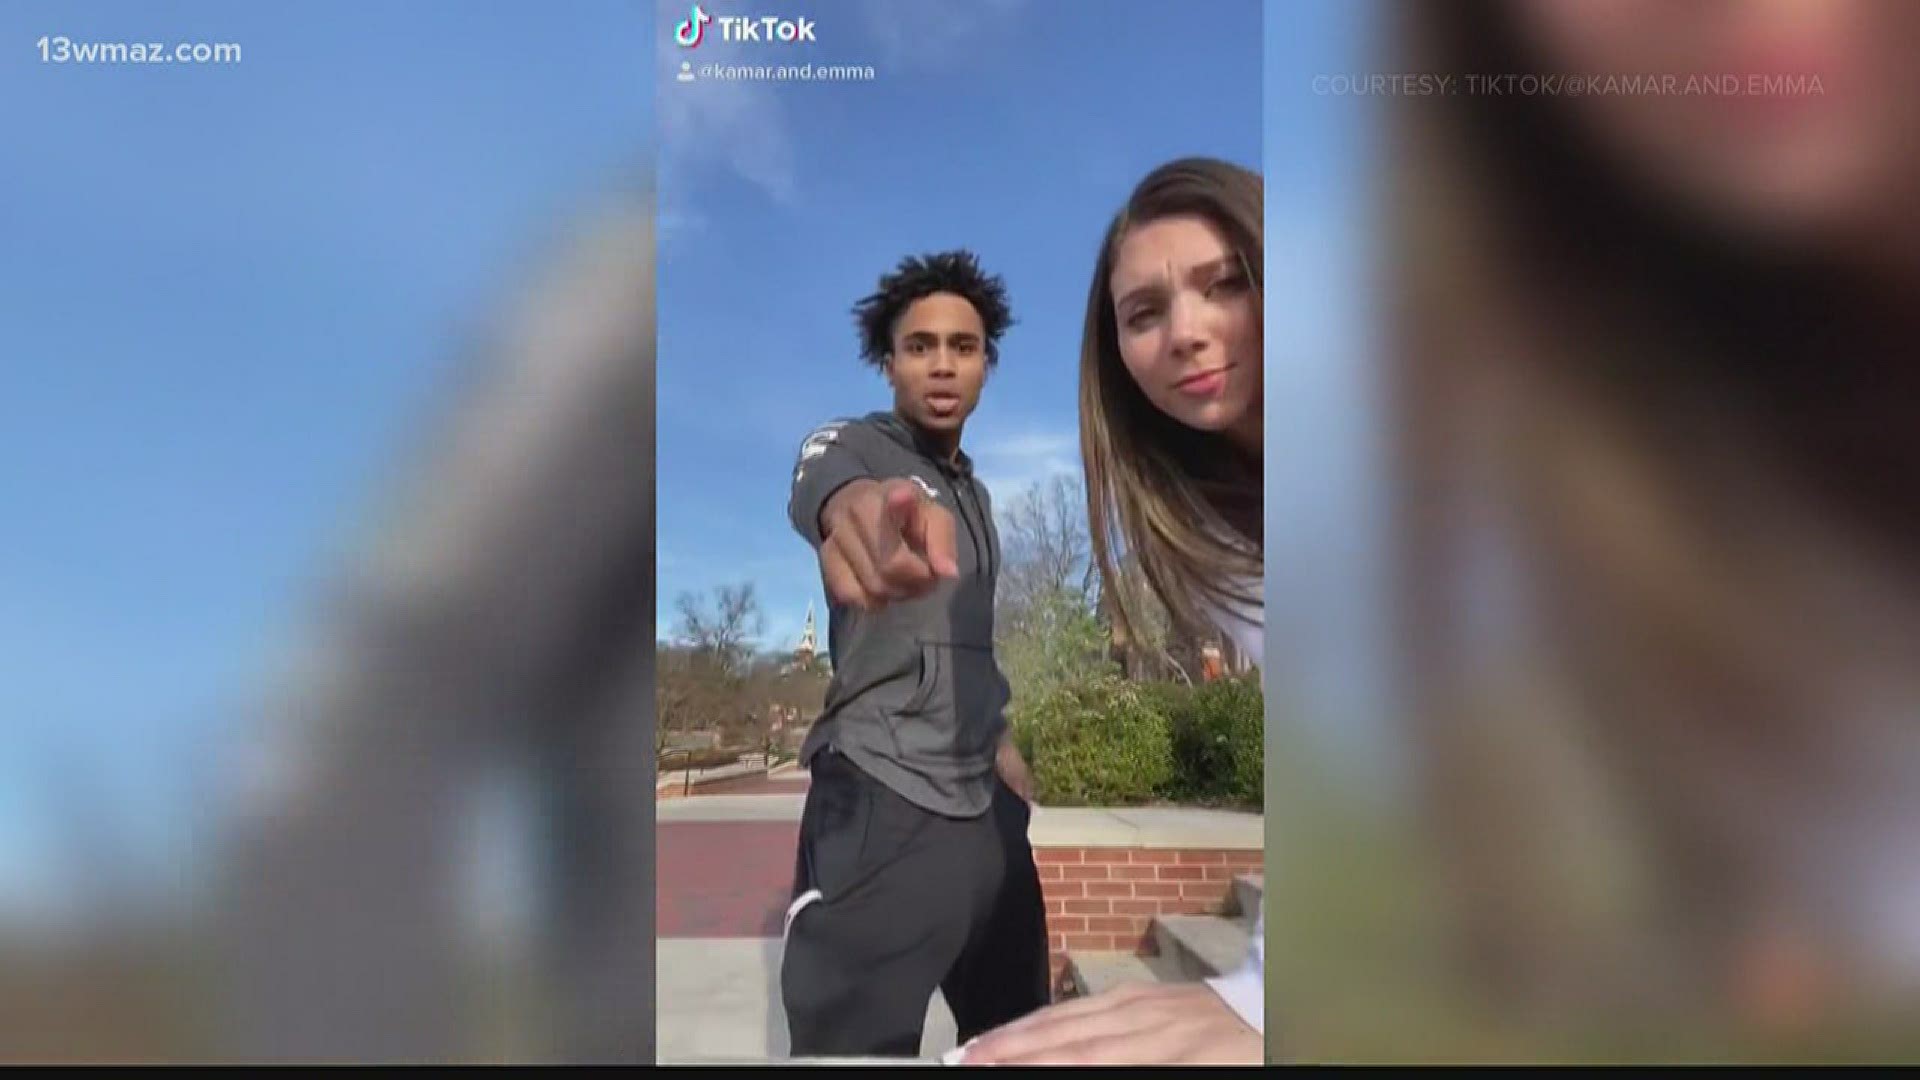 Kamar Robertson and his girlfriend Emma Drash have over 500,000 followers on their joint TikTok account.